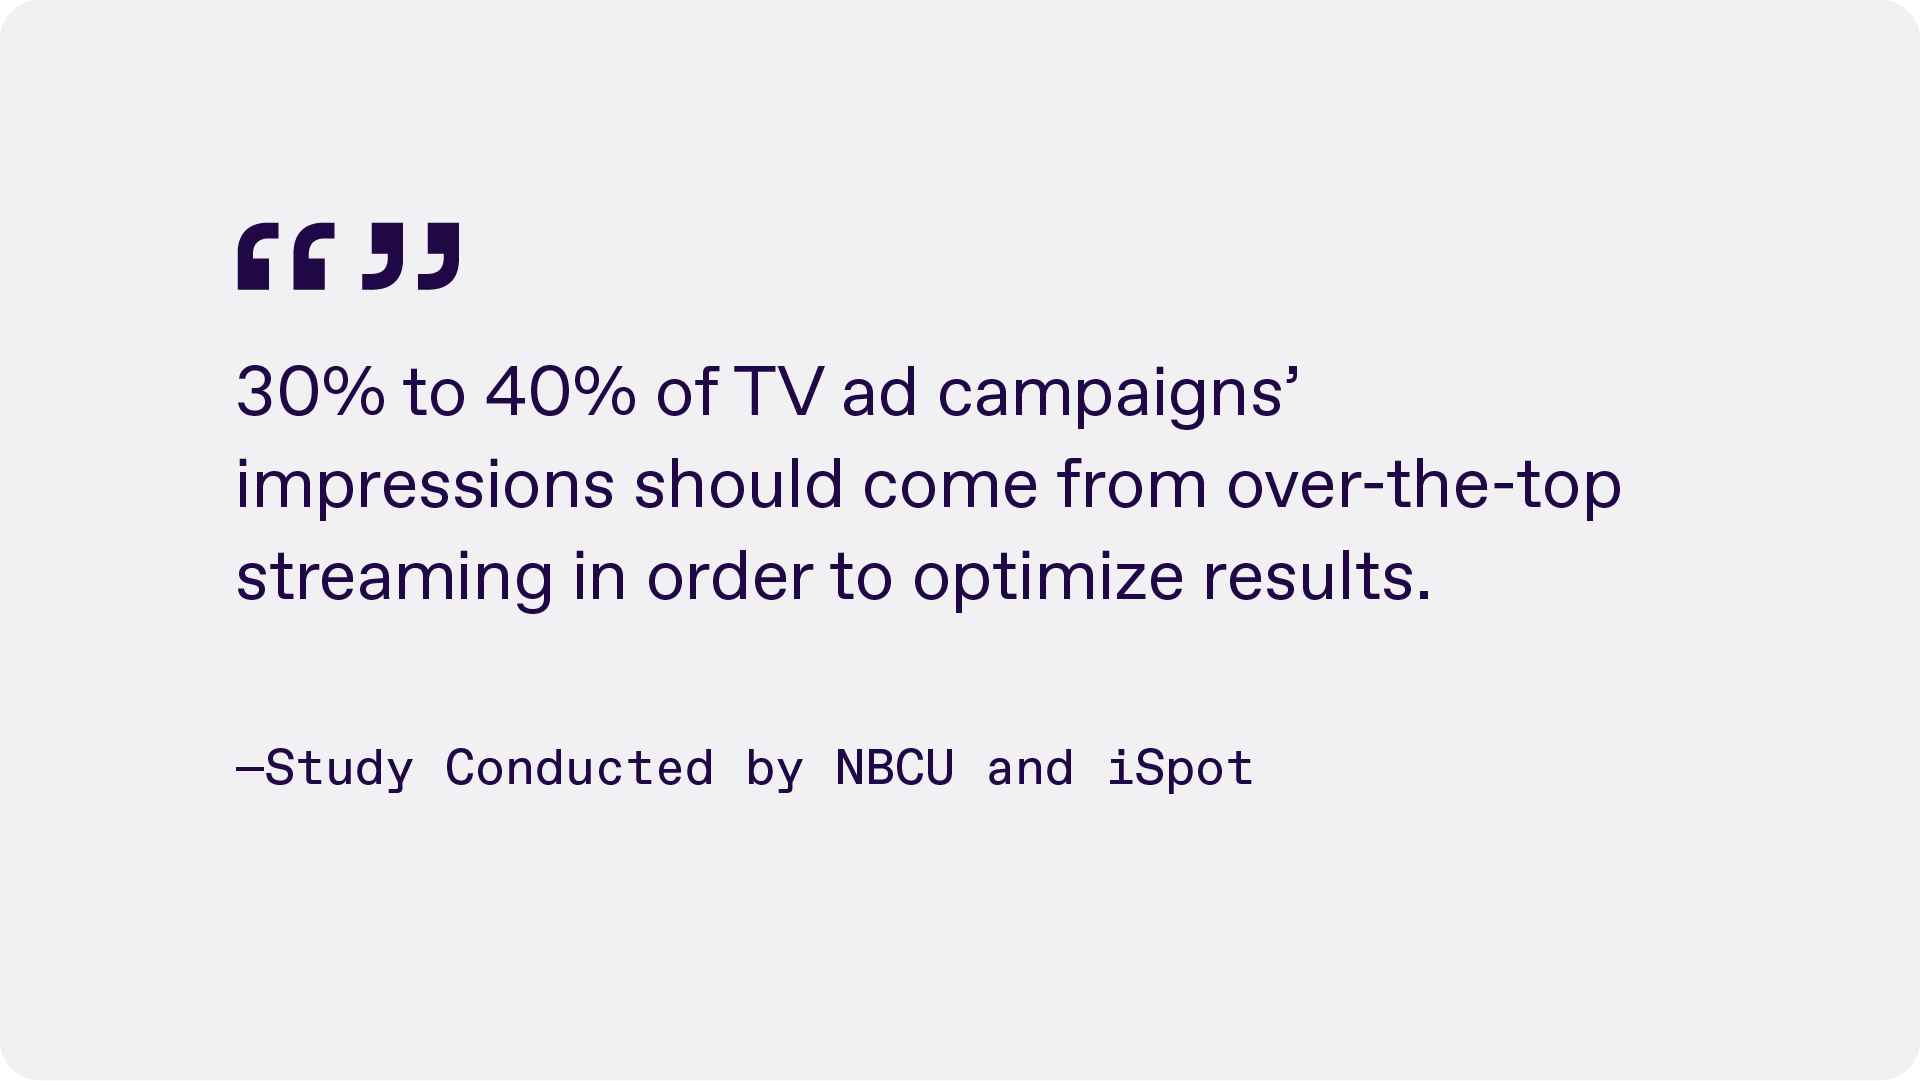 Quote reading: "30% to 40% of TV ad campaigns' impressions should come from over-the-top (OTT) advertising in order to optimize results"